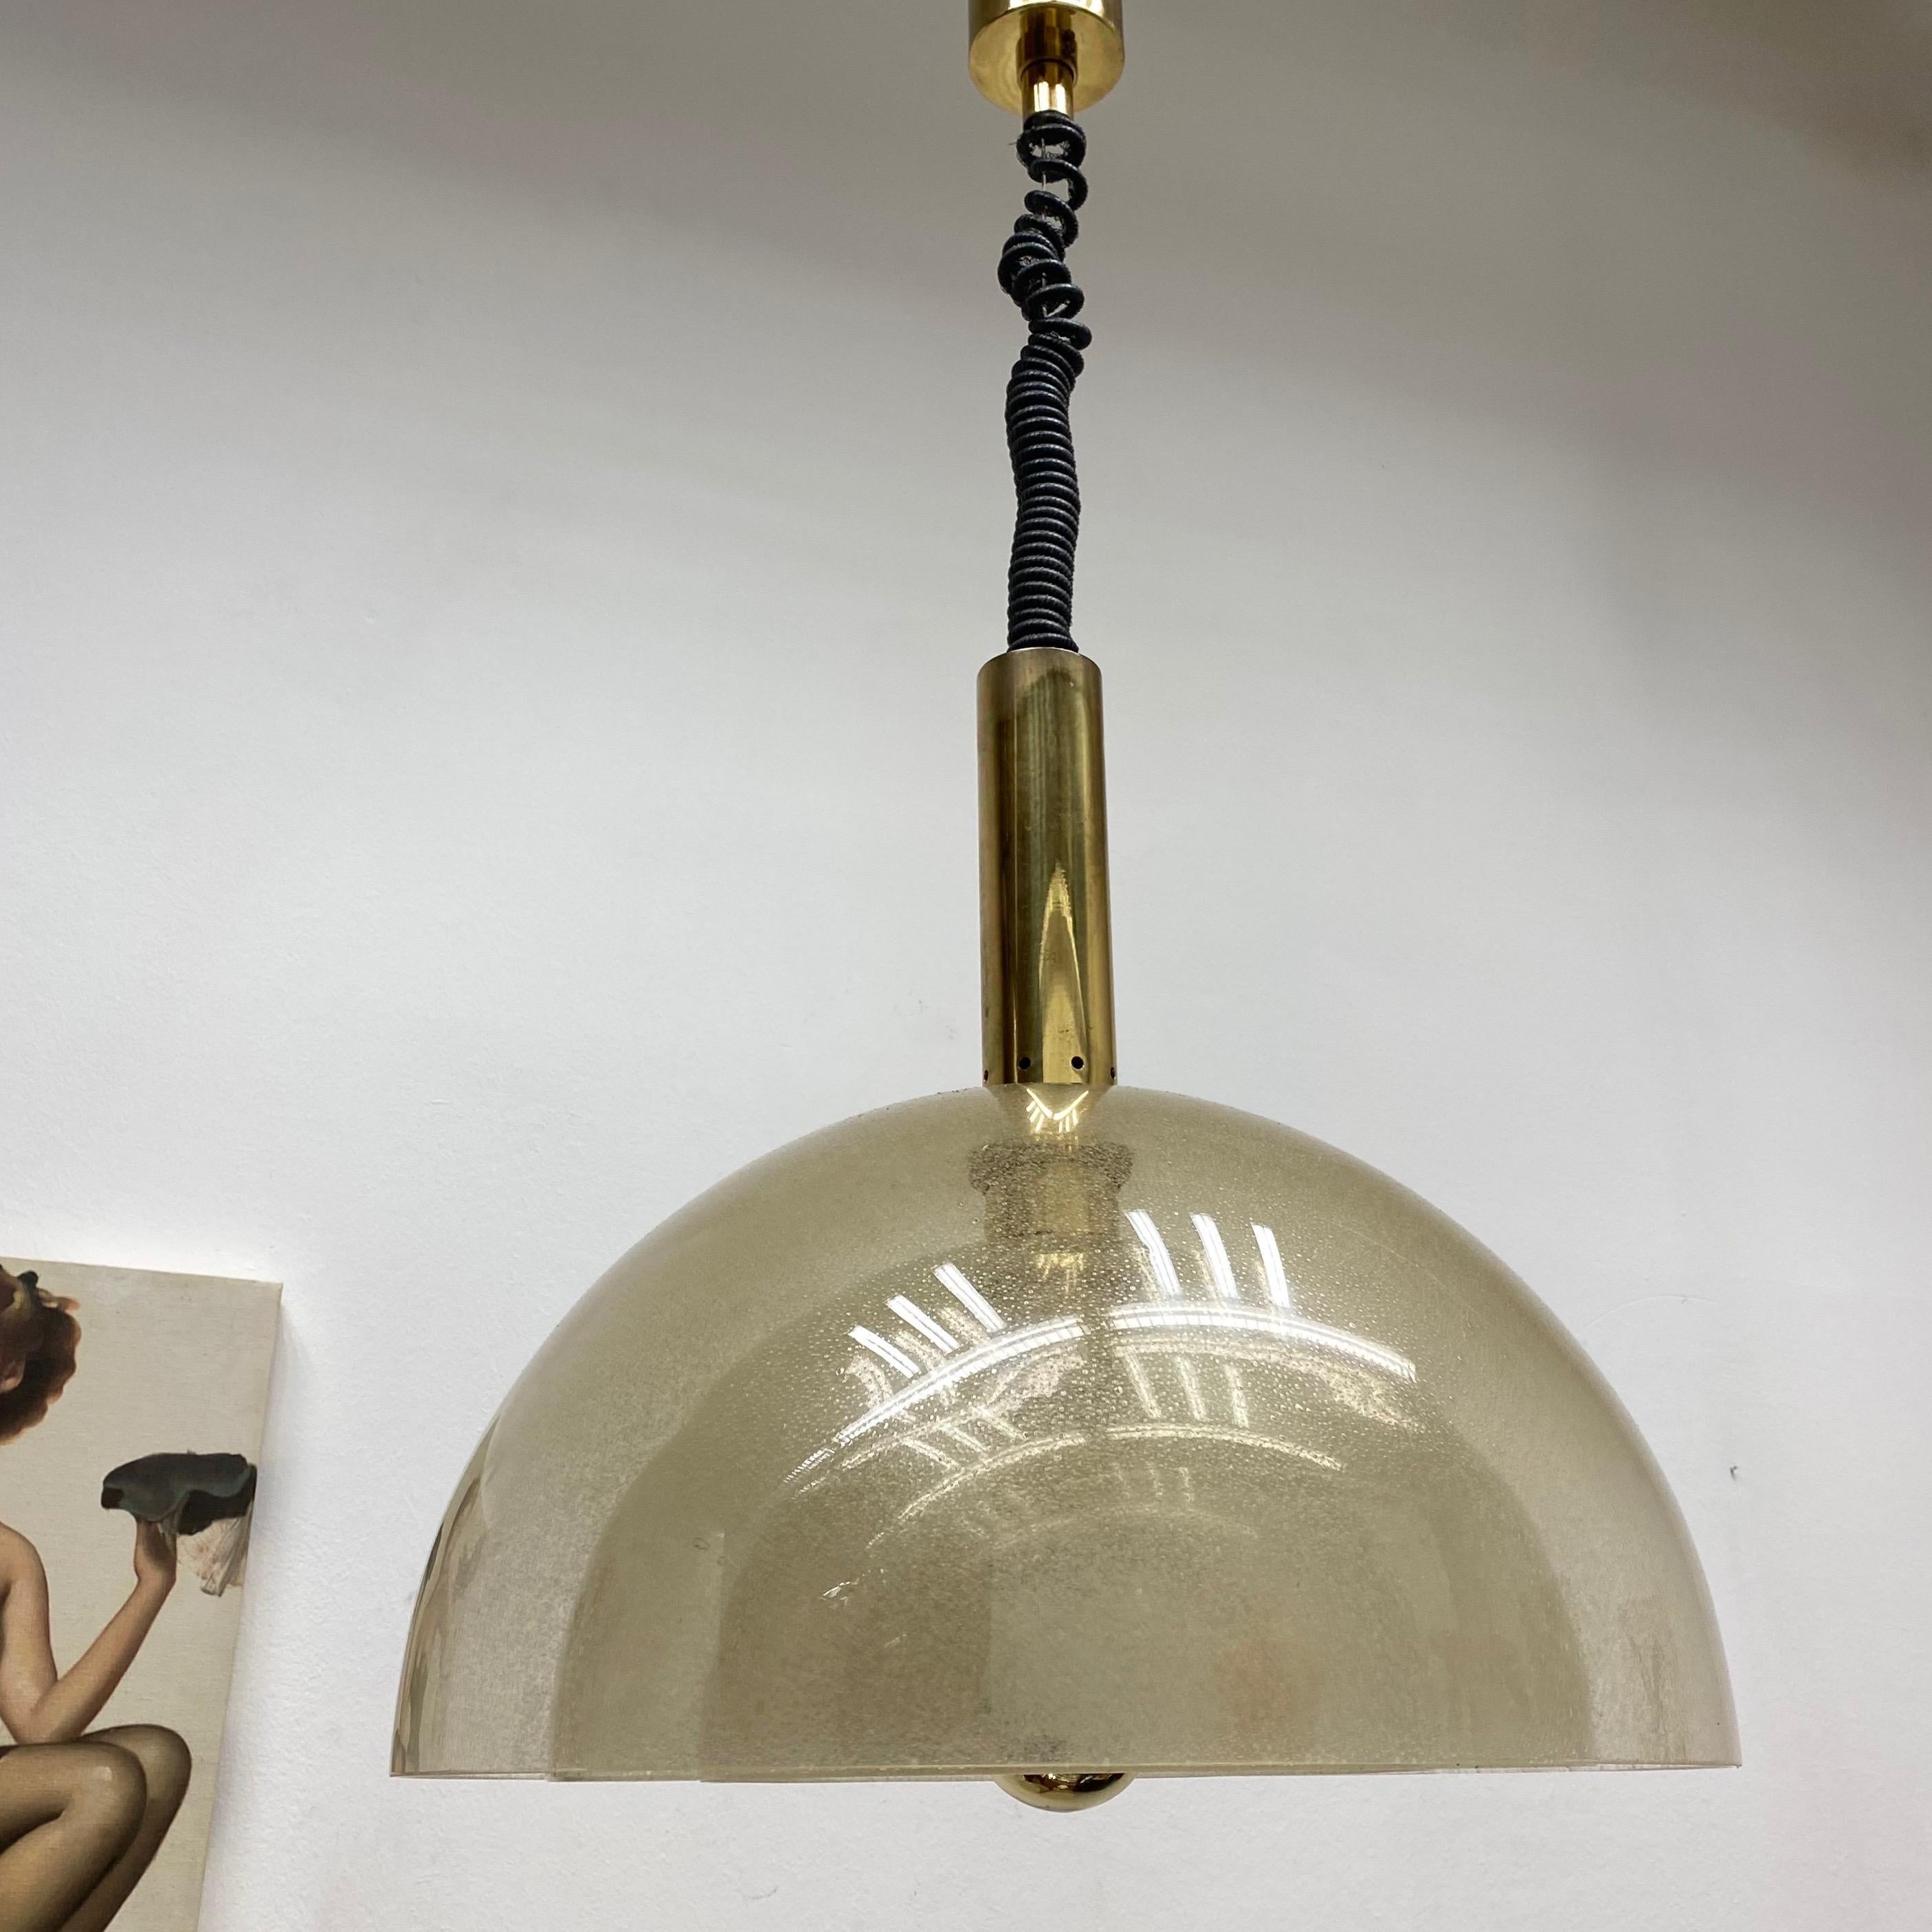 Beautiful four-layer Murano Pulegoso glass pendant lamp by Carlo Nason for Mazzega. Large pendant lamp composed of four-layer Murano glass domes. All attached by a polished brass stem and canopy. Elegant and ingenious designed by Italian master of